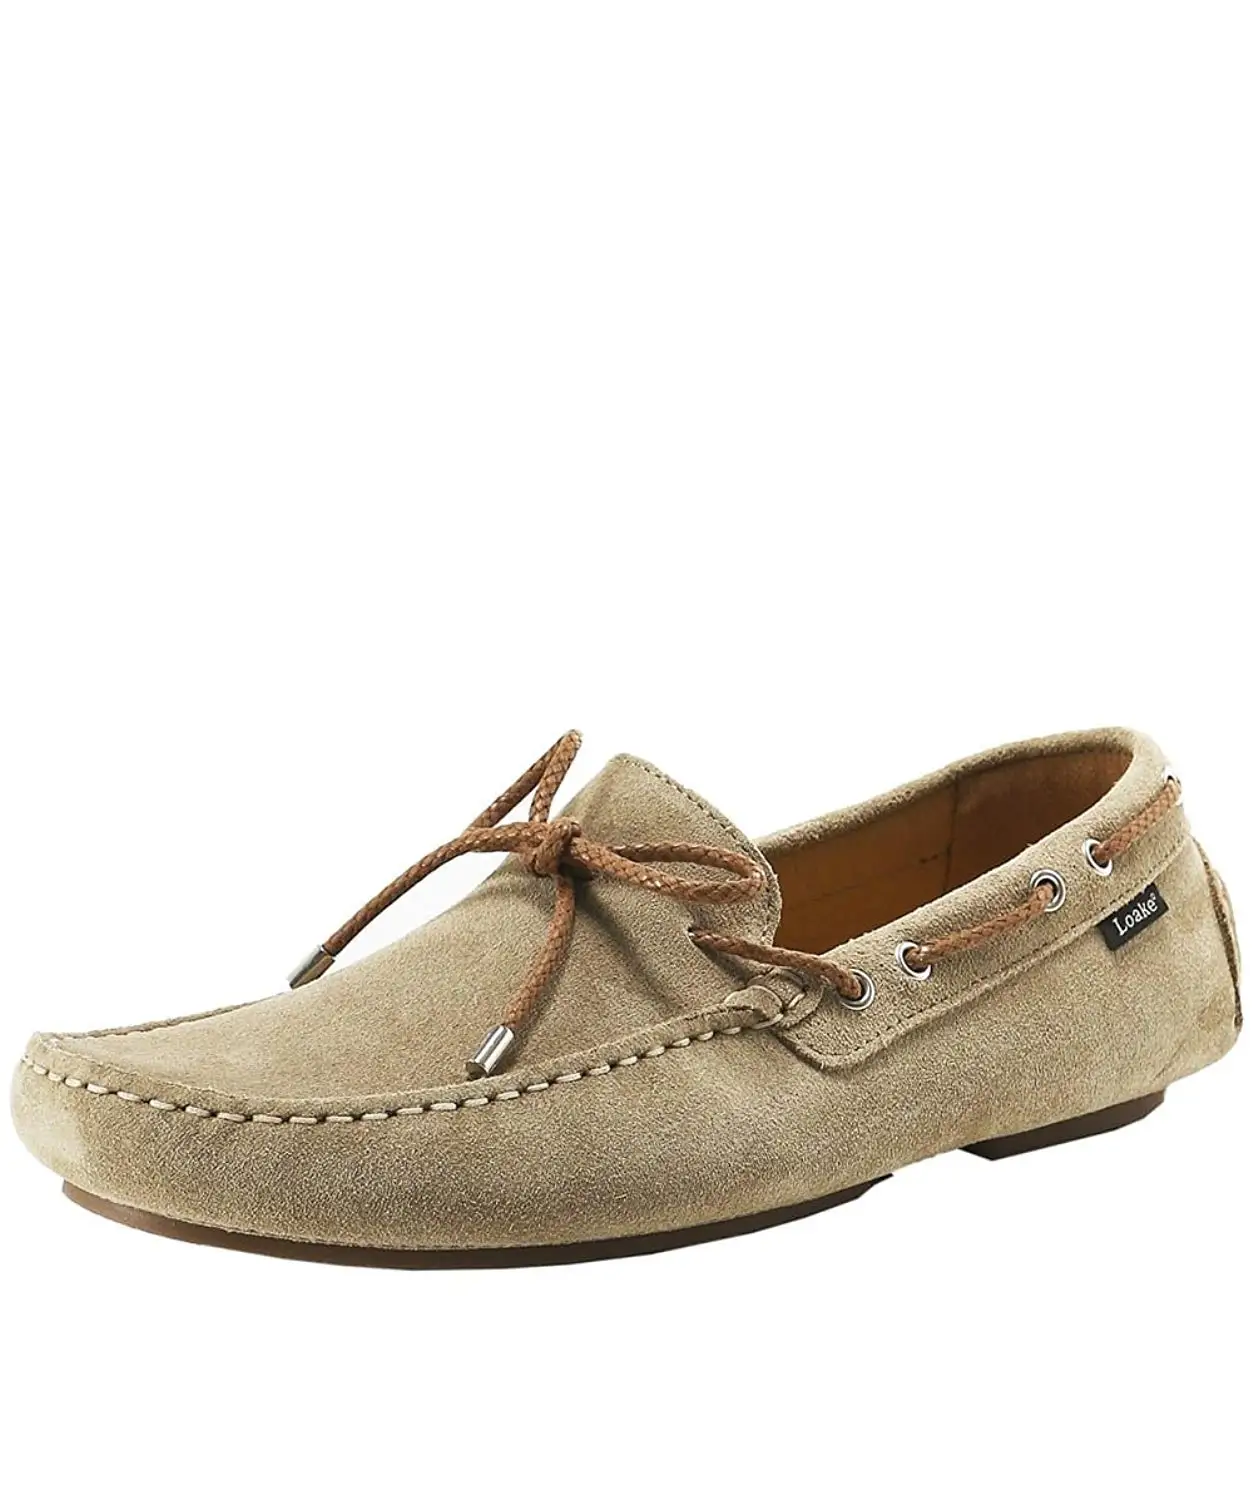 loake men's suede loafers